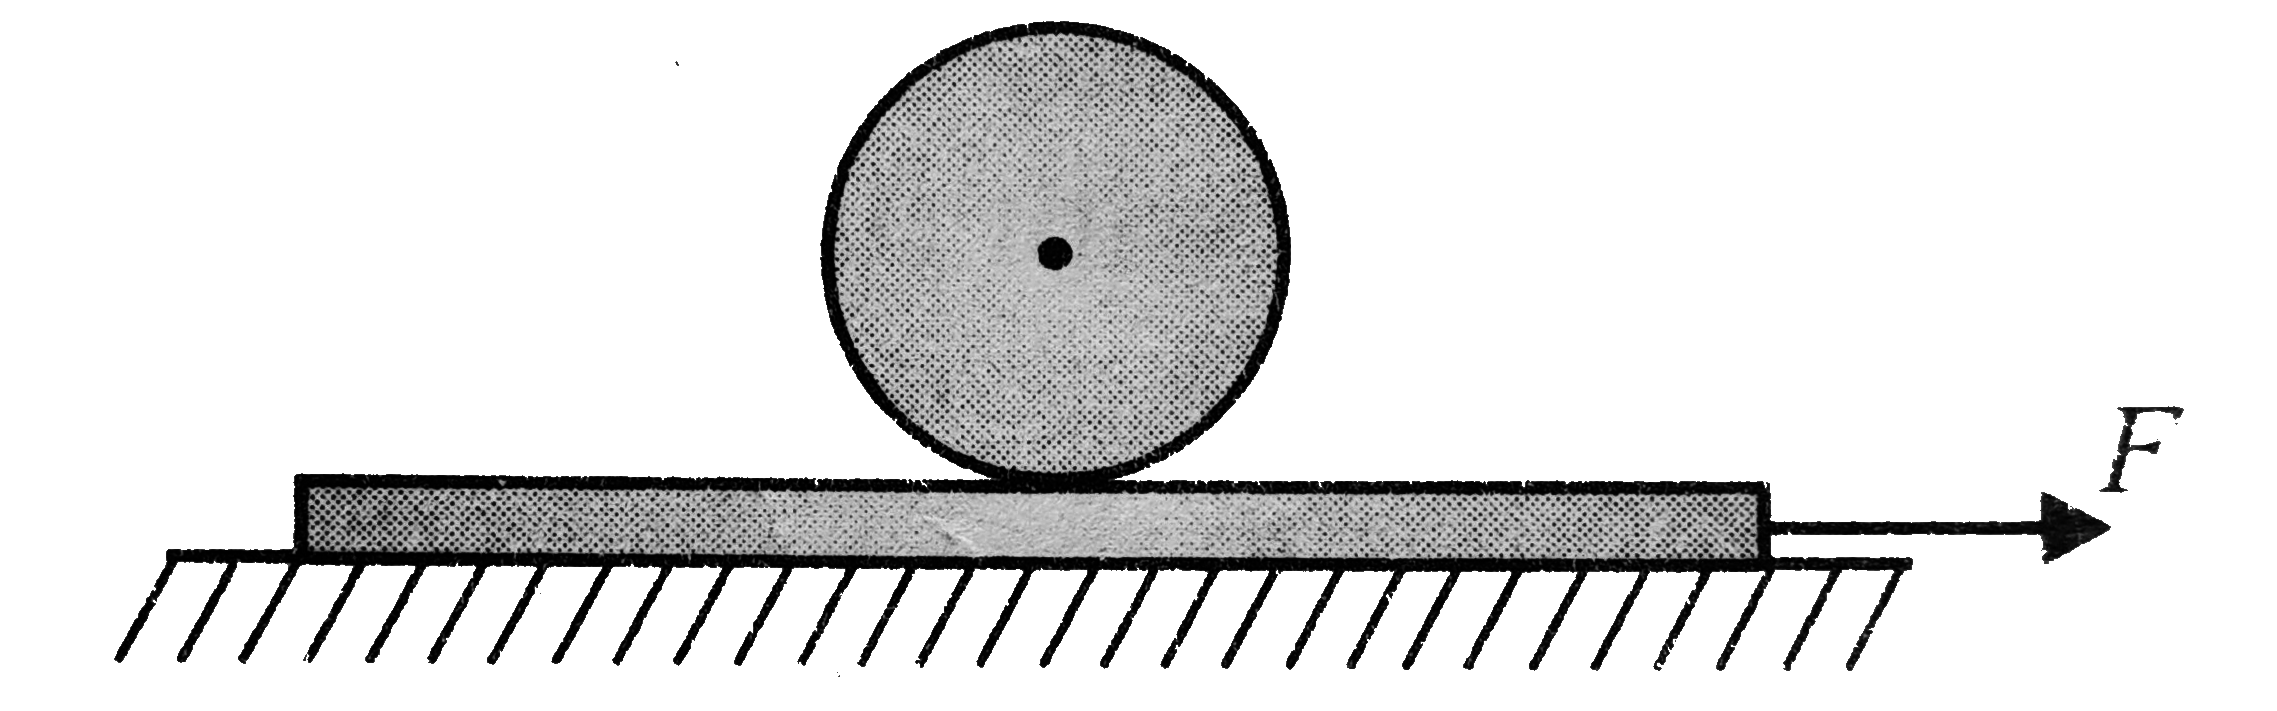 A plank with a uniform sphere placed on it rests on a smooth horizontal plane. The plank is pulled to the right by a constant force F. It the sphere does not slip over the plank, then